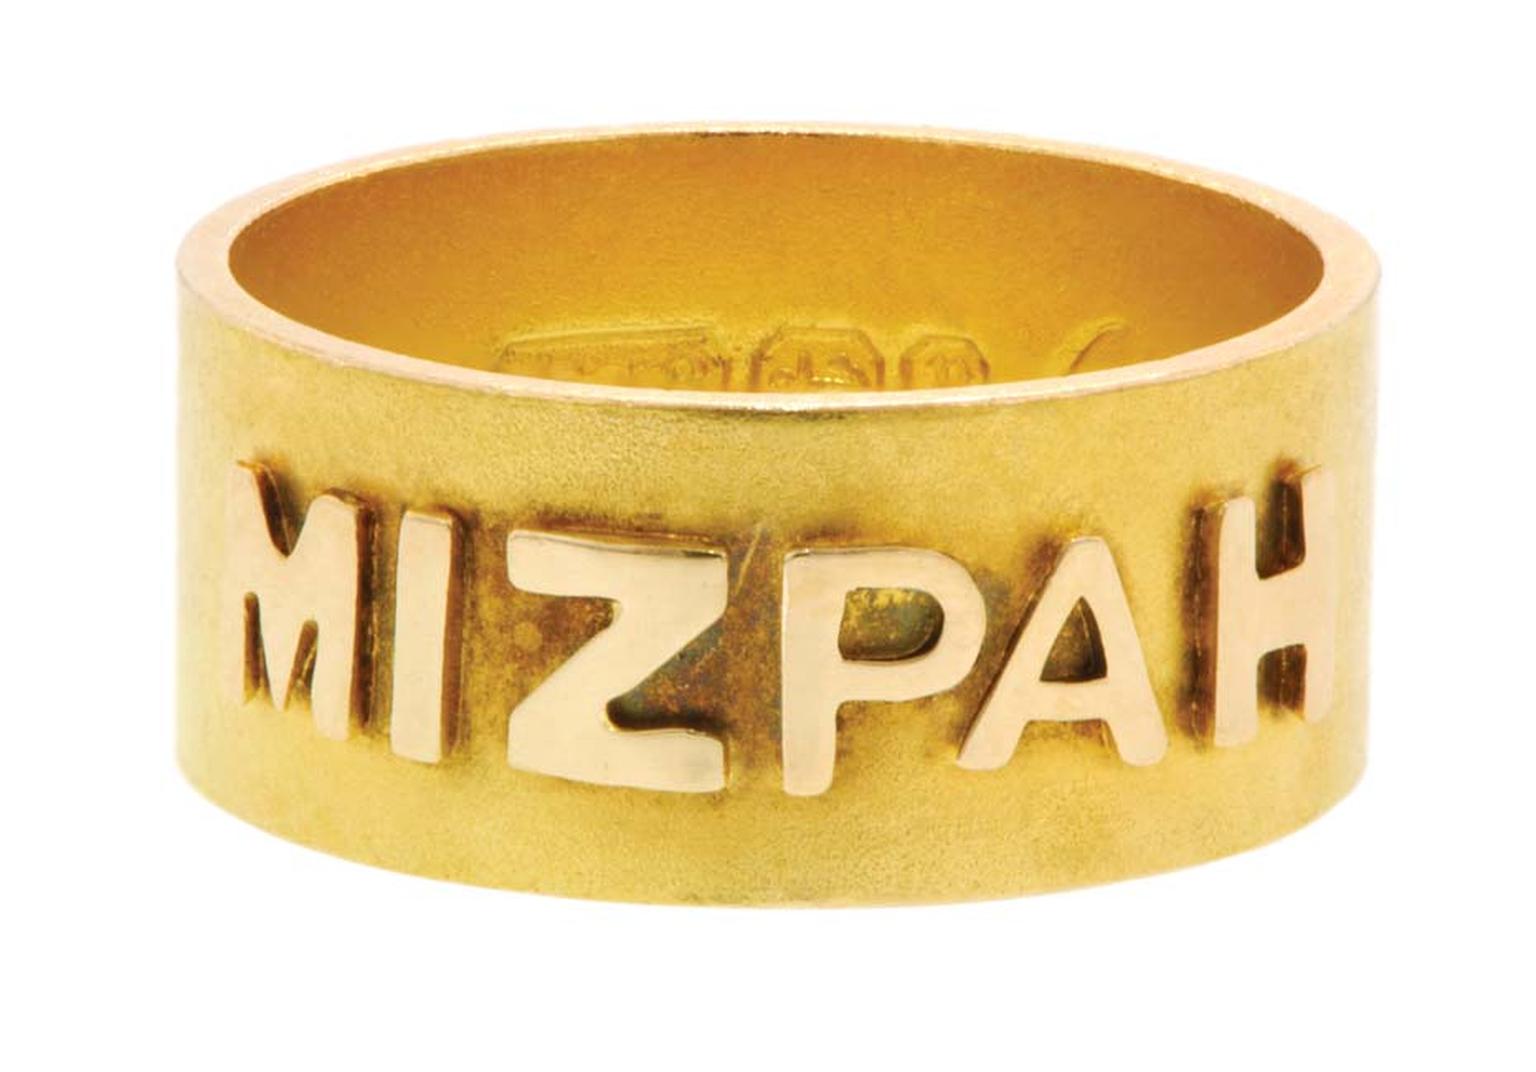 Mizpah gold band from 1898 with raised lettering by the Coley Brothers.